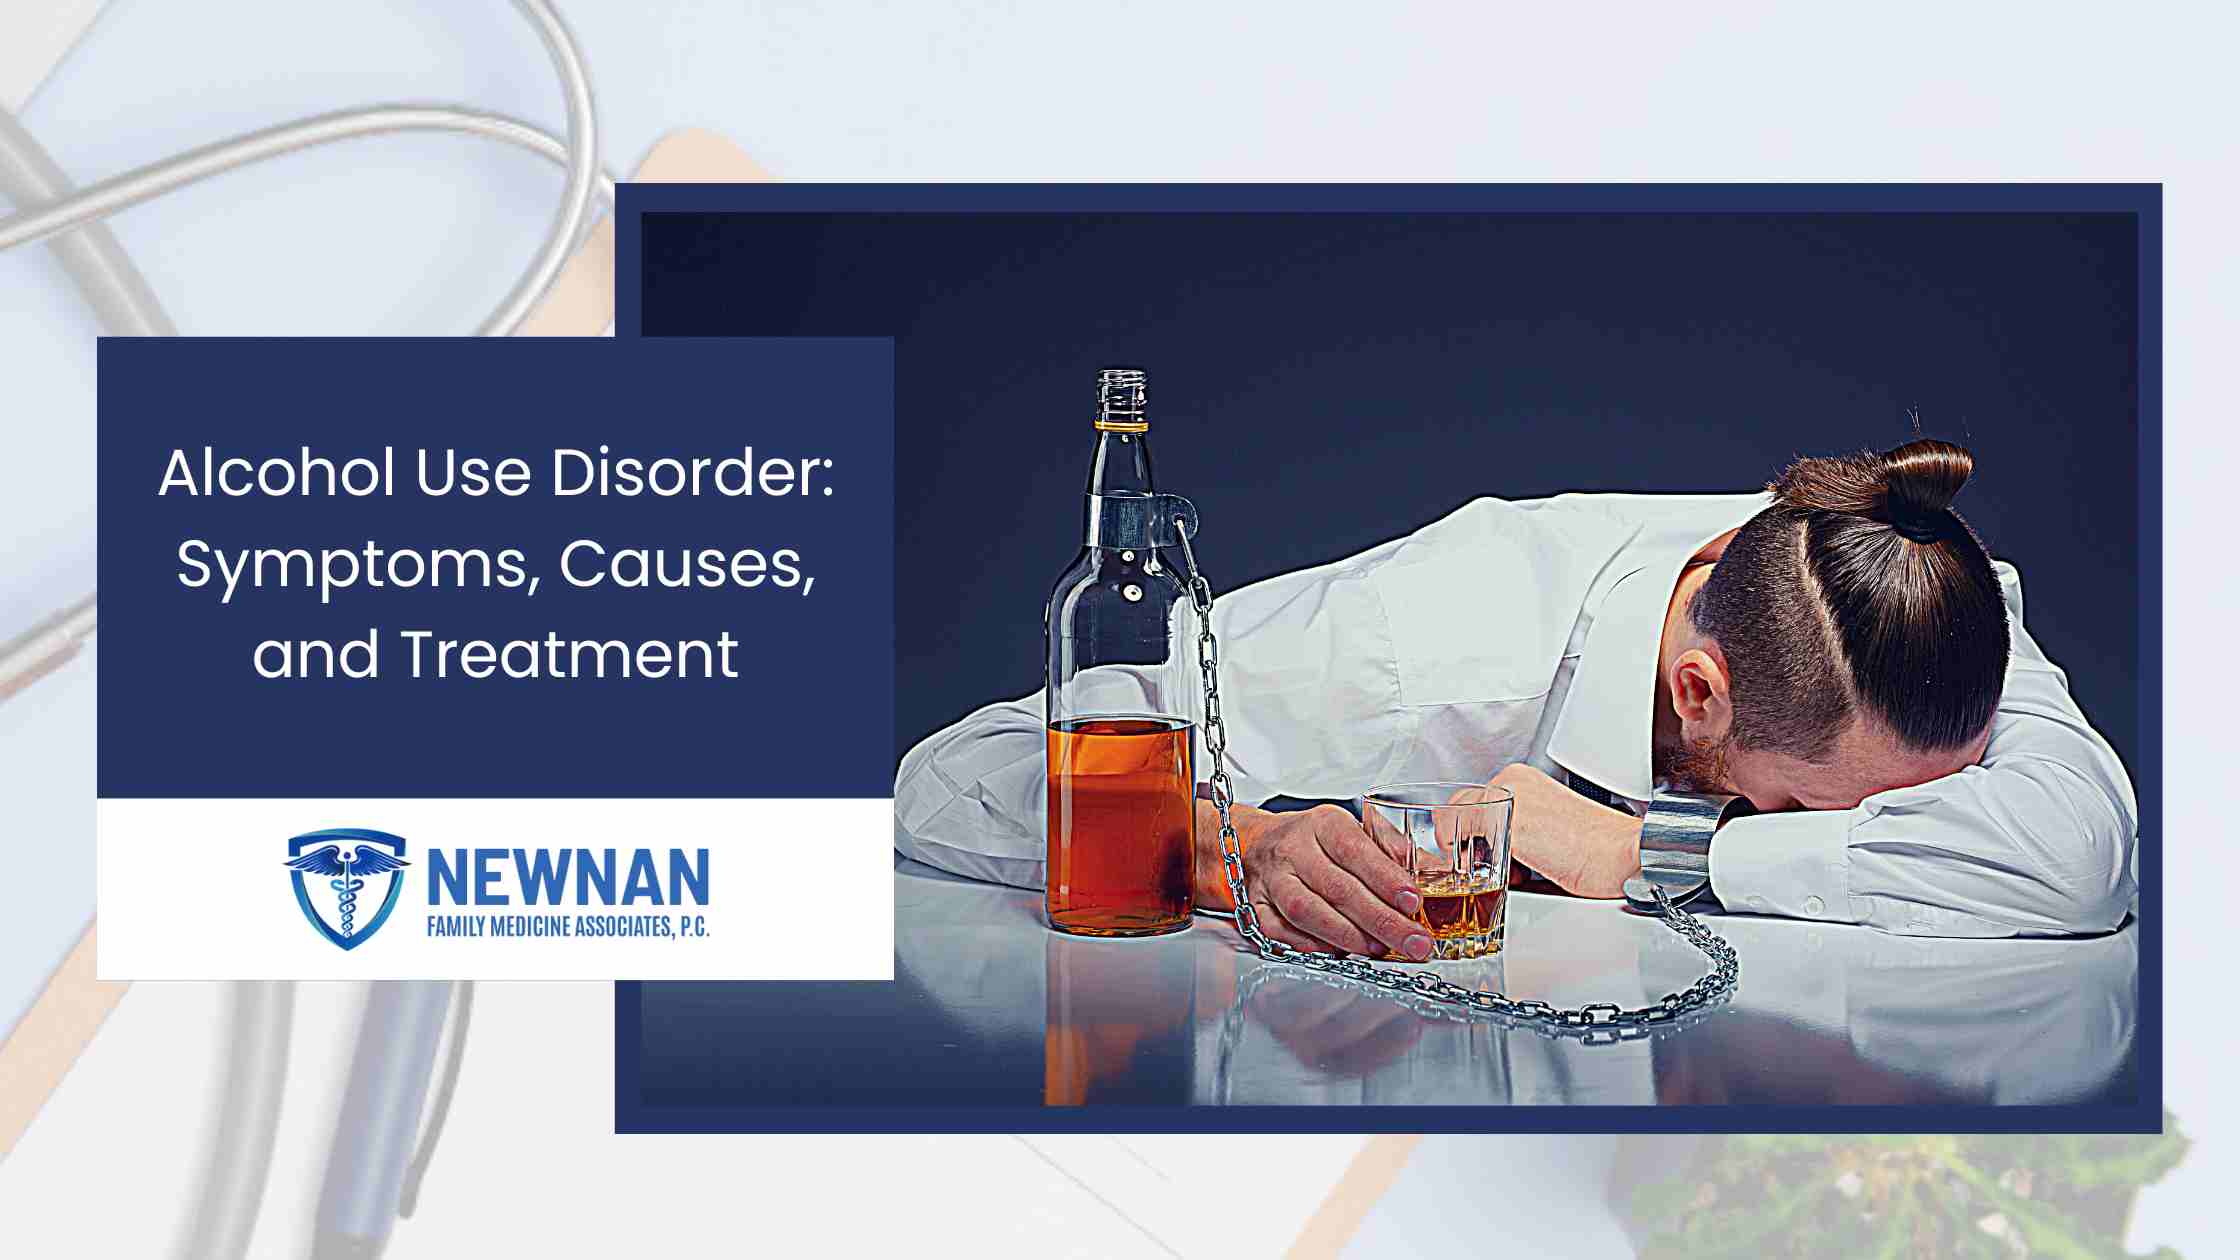 research into alcohol use disorder